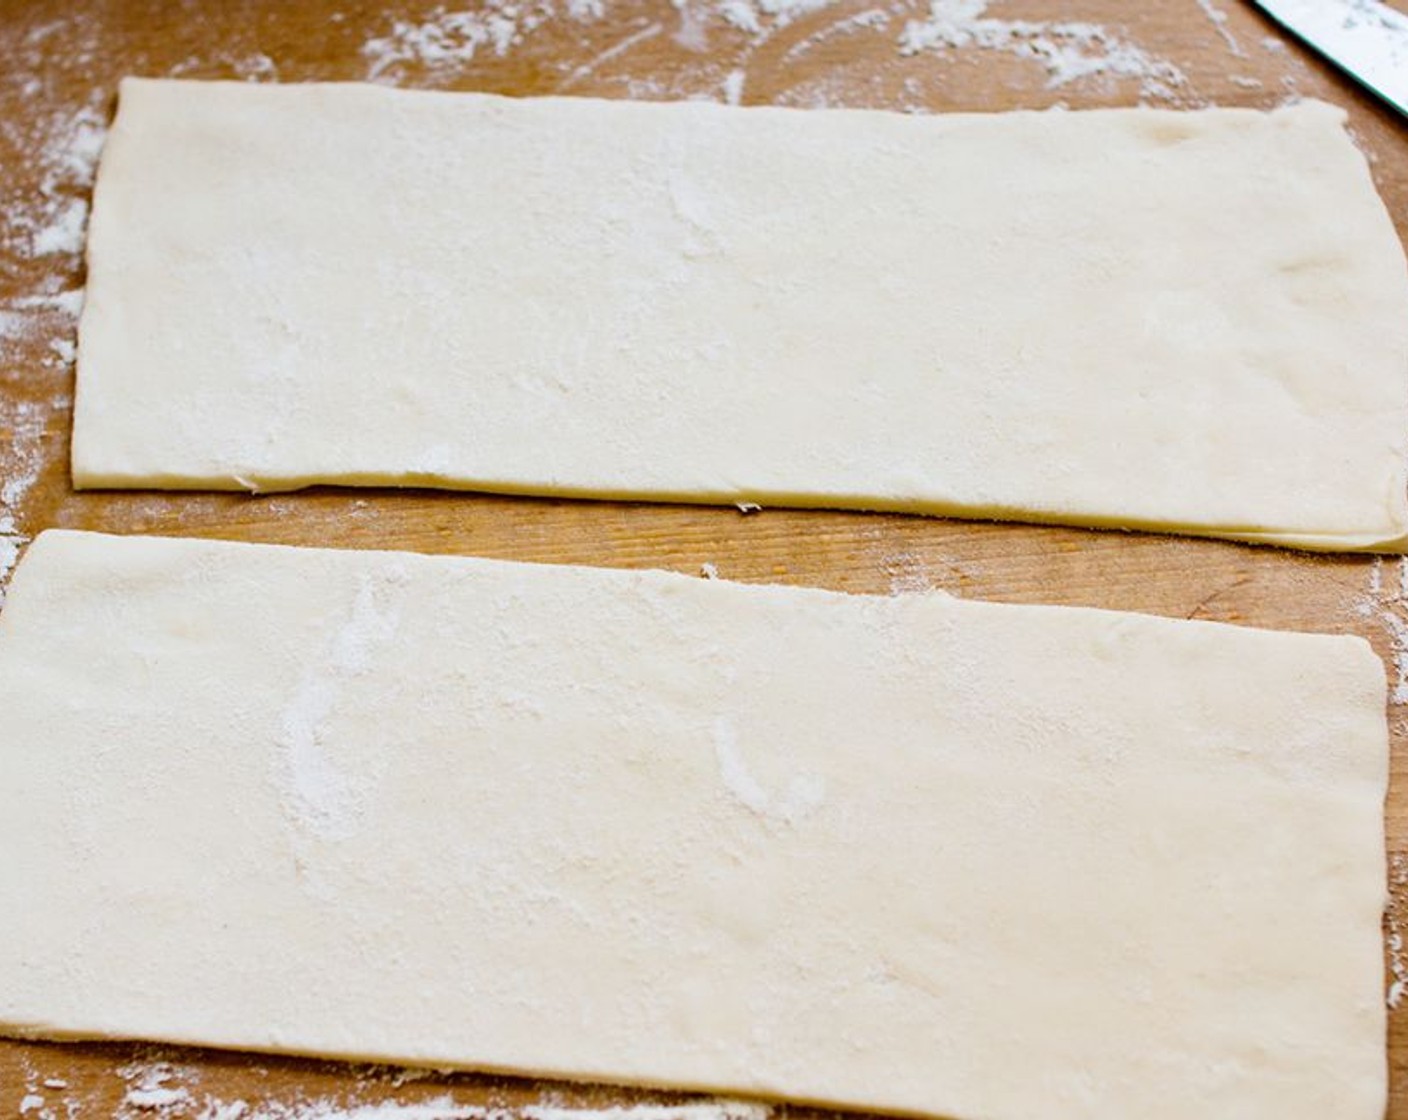 step 2 Sprinkle your worktop with a pinch of All-Purpose Flour (1 pinch), lay out your Puff Pastry (1 sheet) gently and halve it lengthwise, so you have two long and thin rectangles.